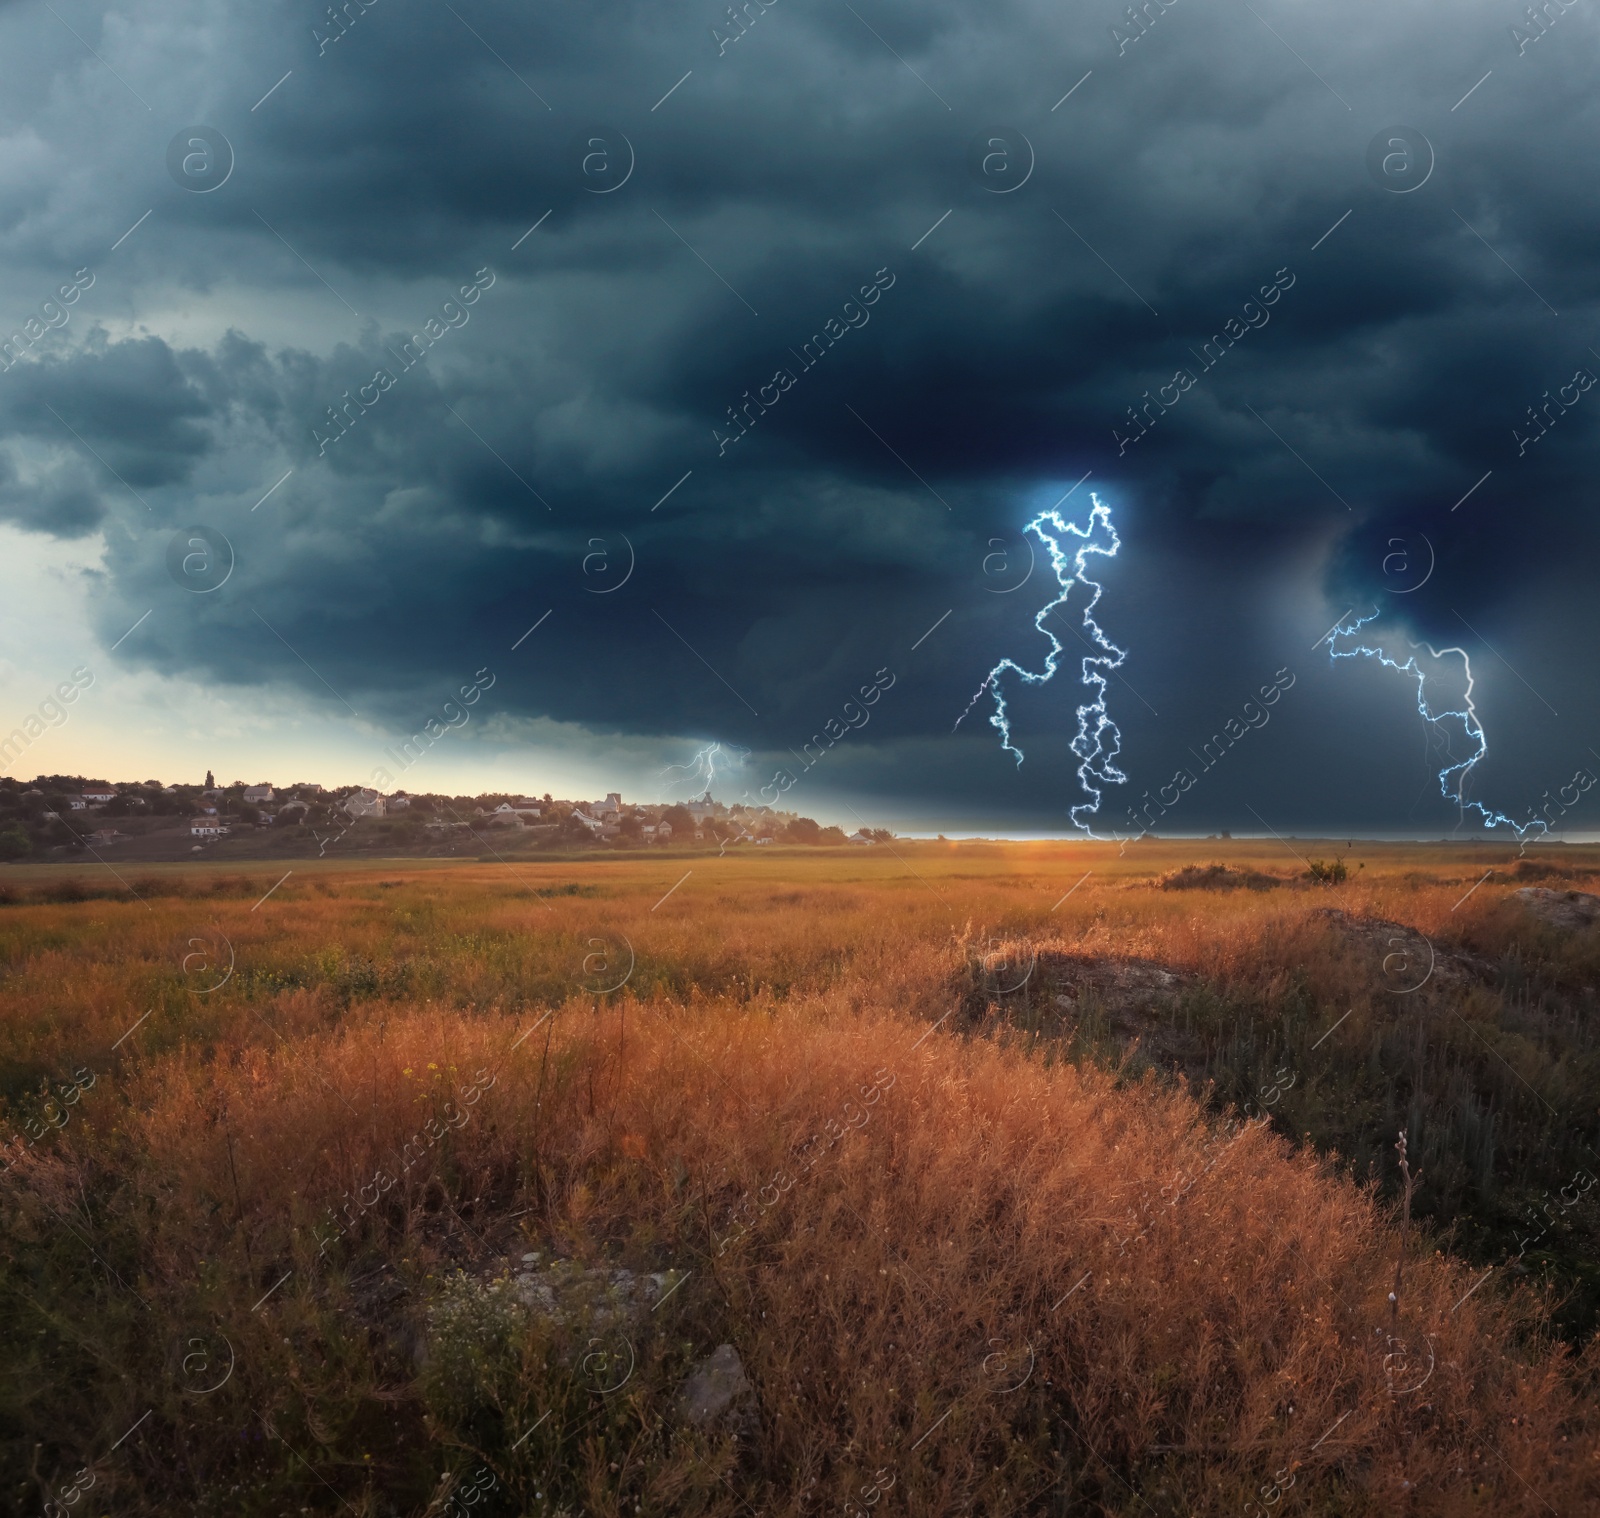 Image of Picturesque thunderstorm over field near village. Dark cloudy sky with lightnings